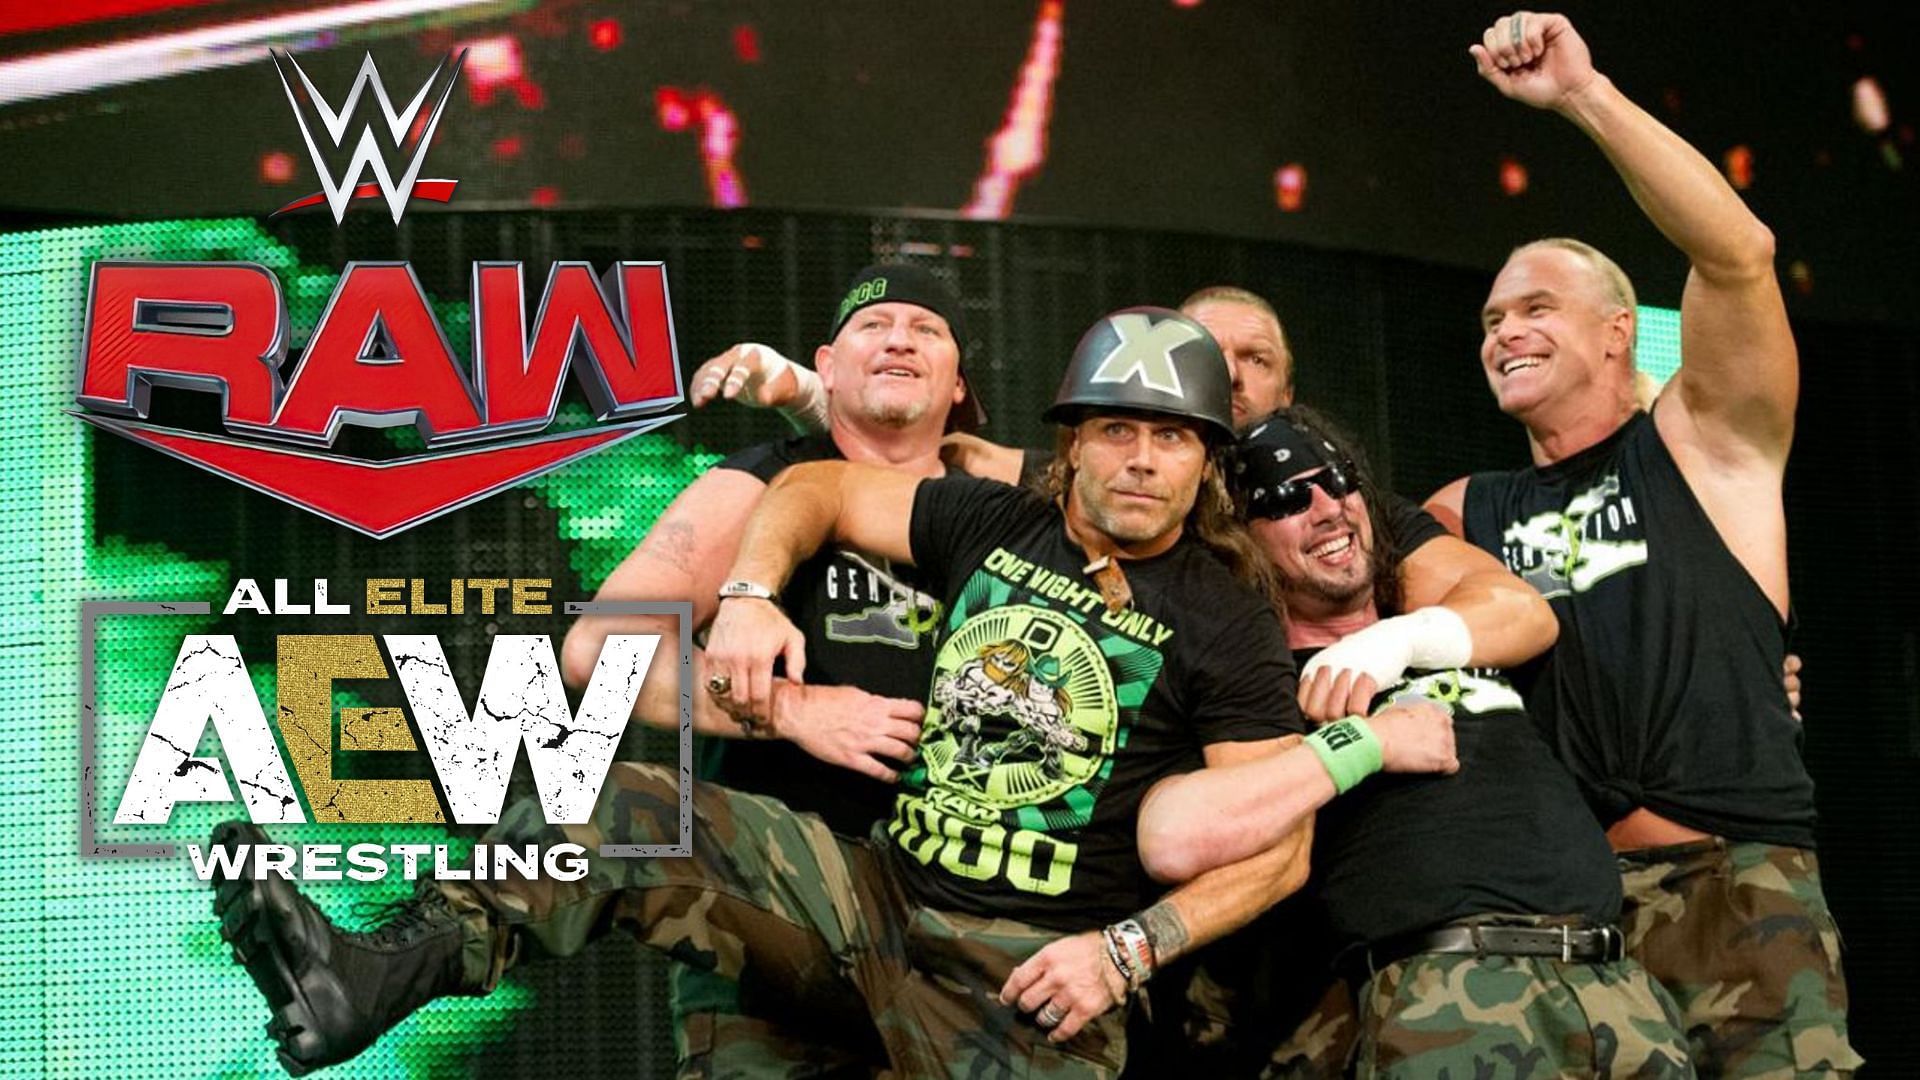 D-Generation X is one of the most recognizable factions in WWE